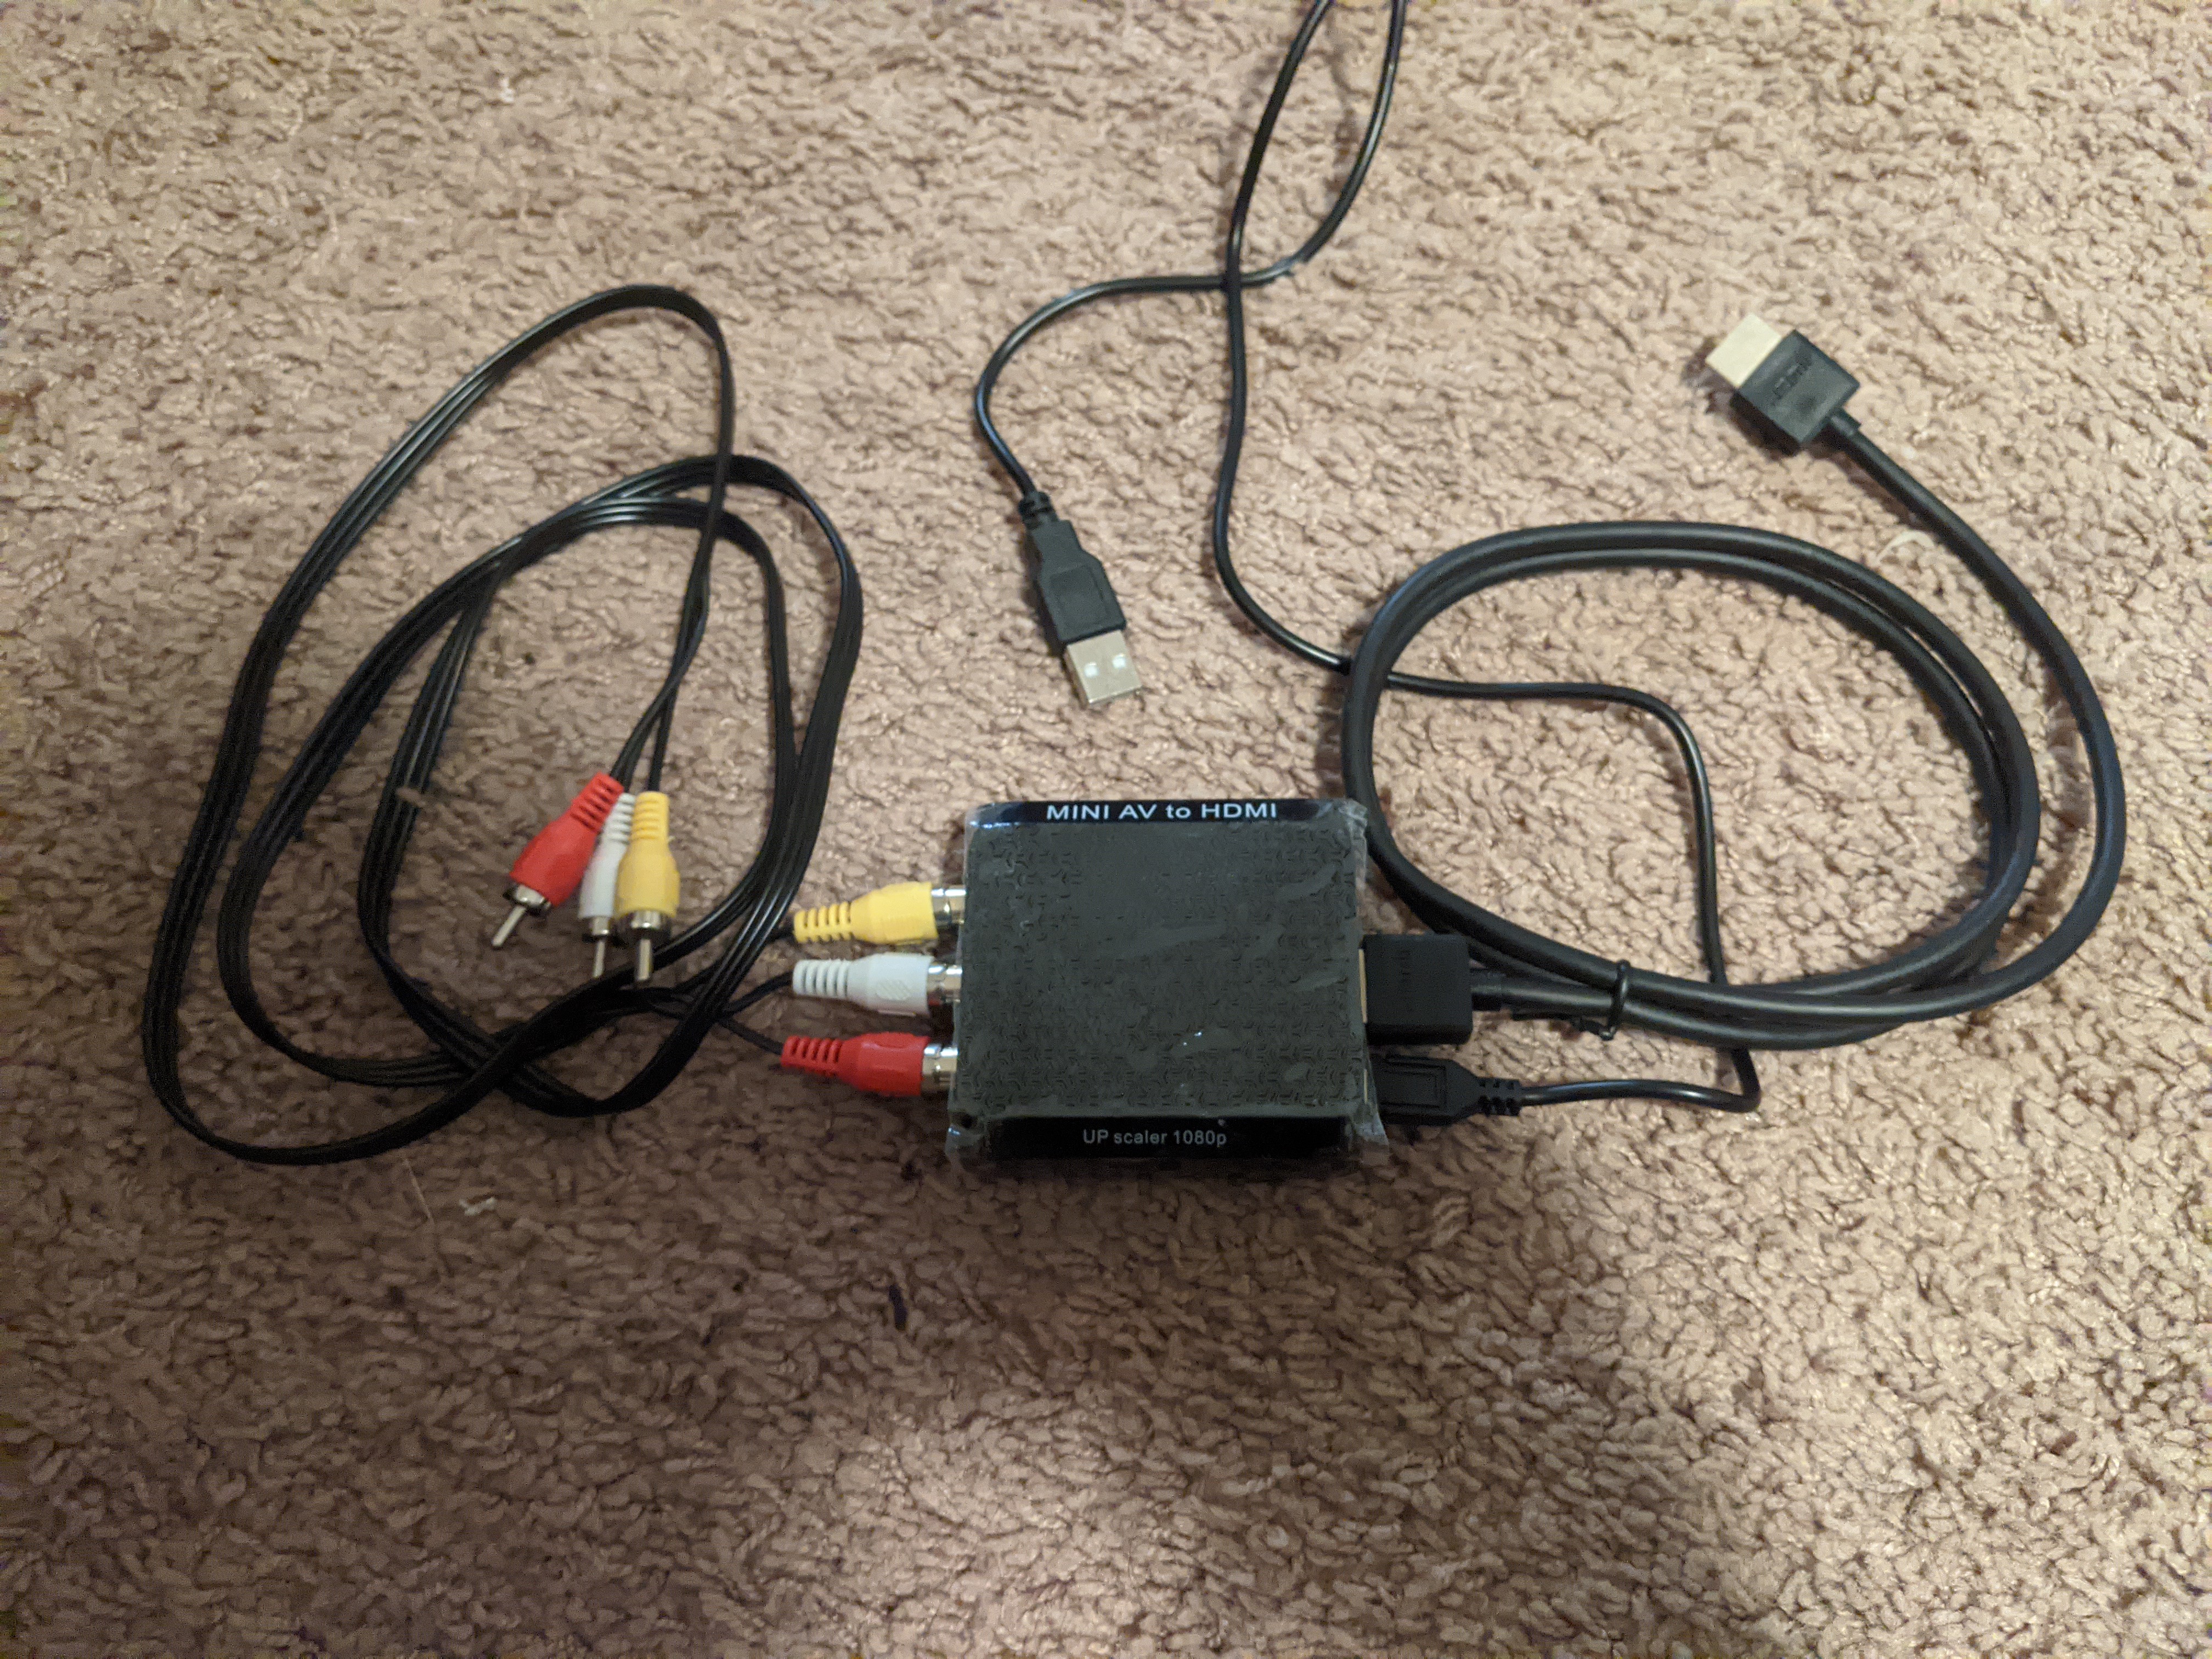 Converter box with cables